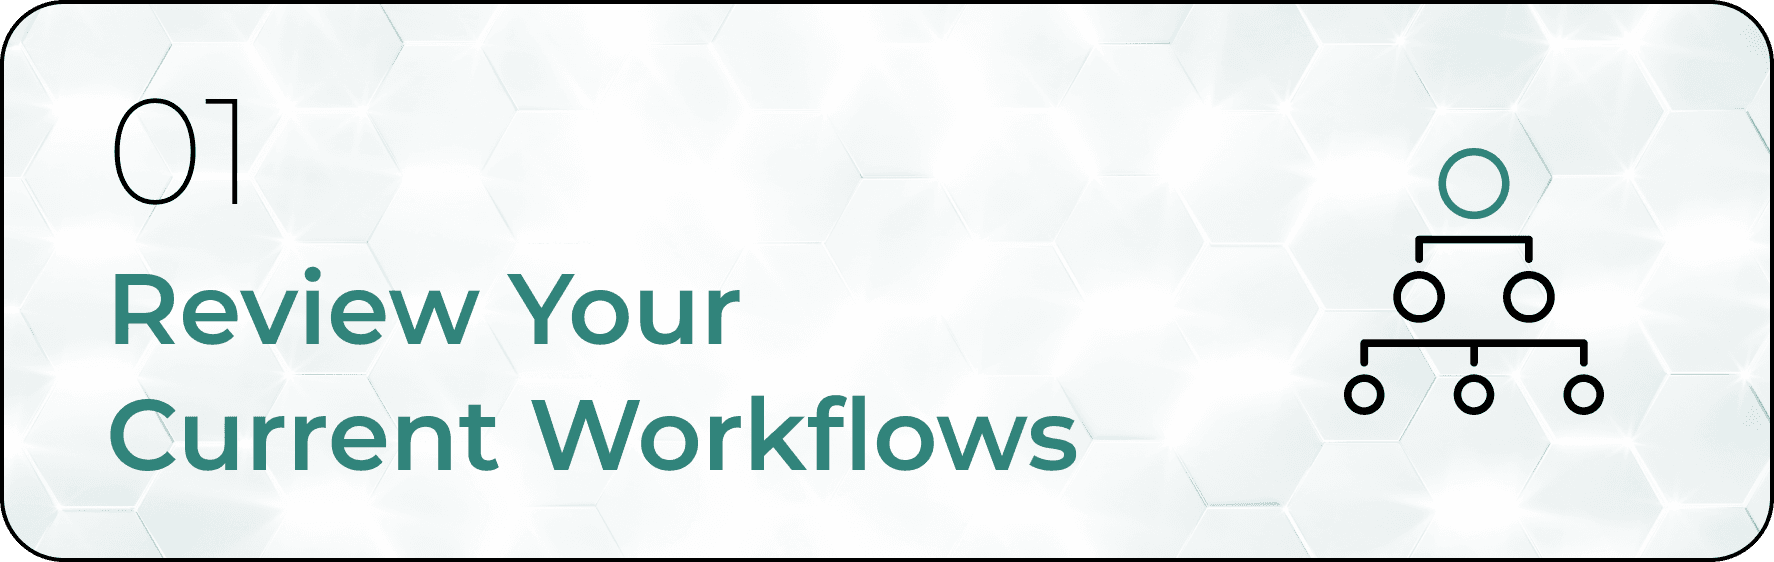 Review your current workflows.